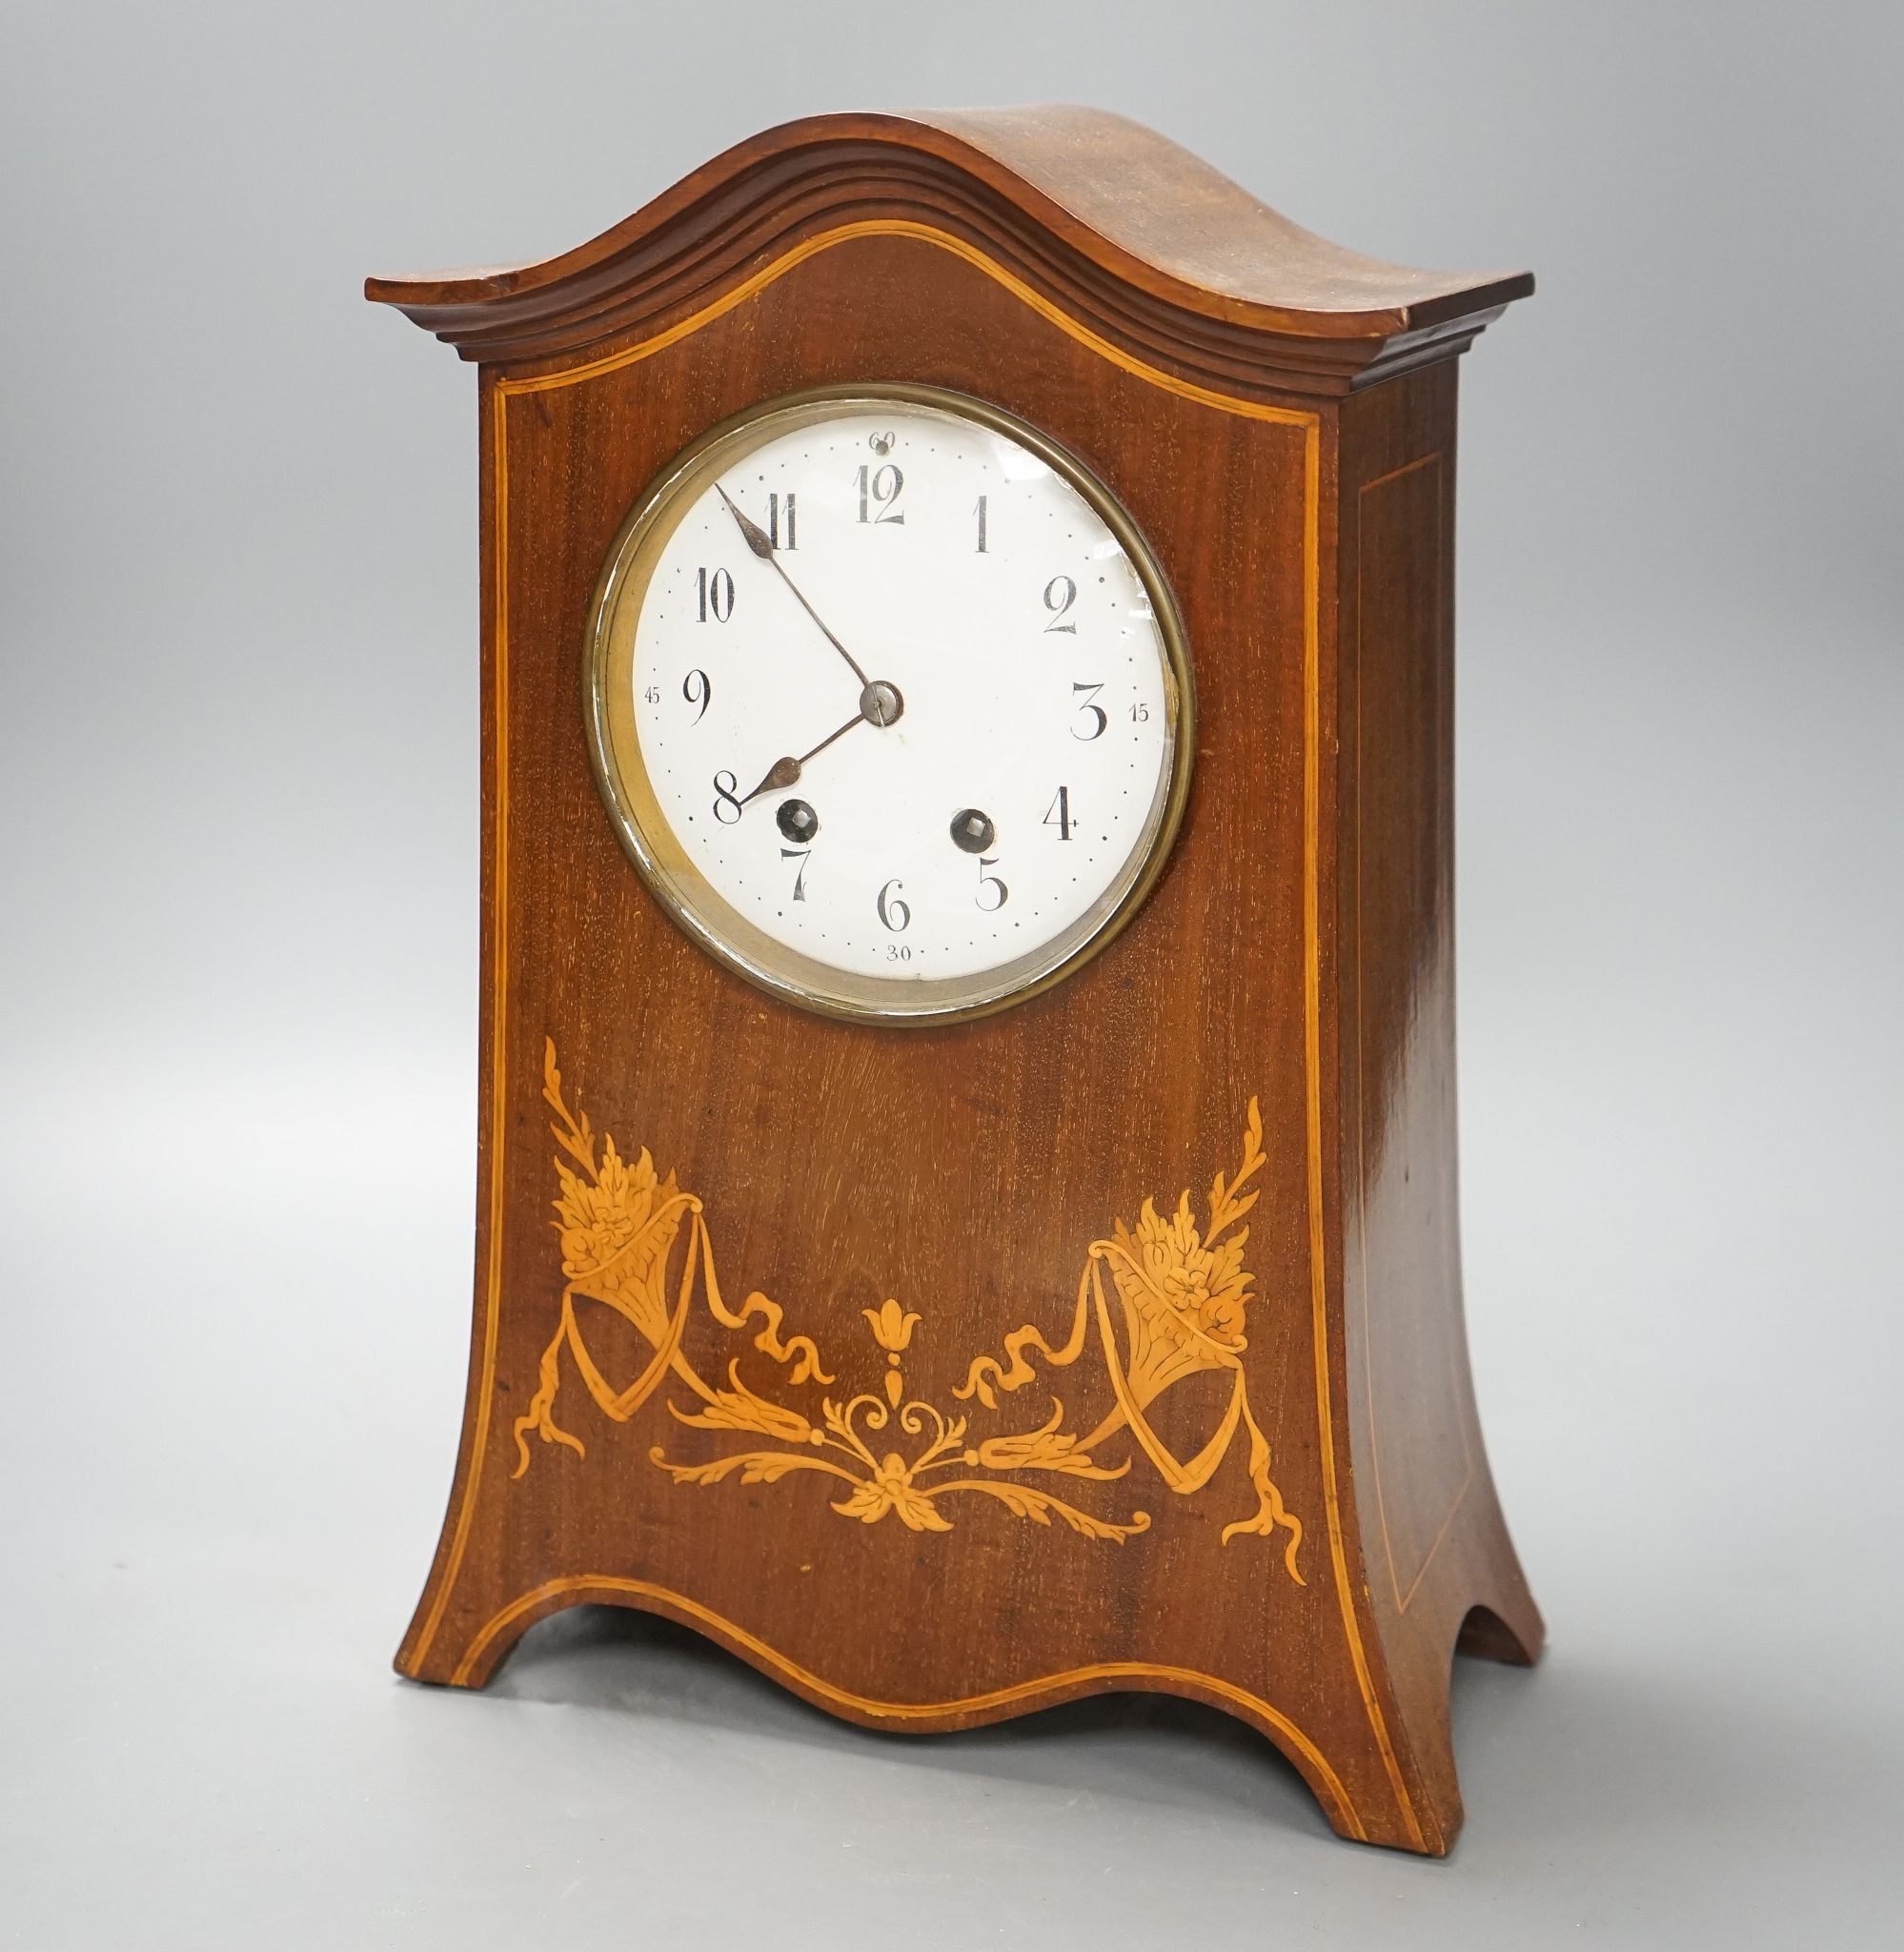 An Edwardian inlaid mahogany mantel clock with French gong-striking movement, 39cm.